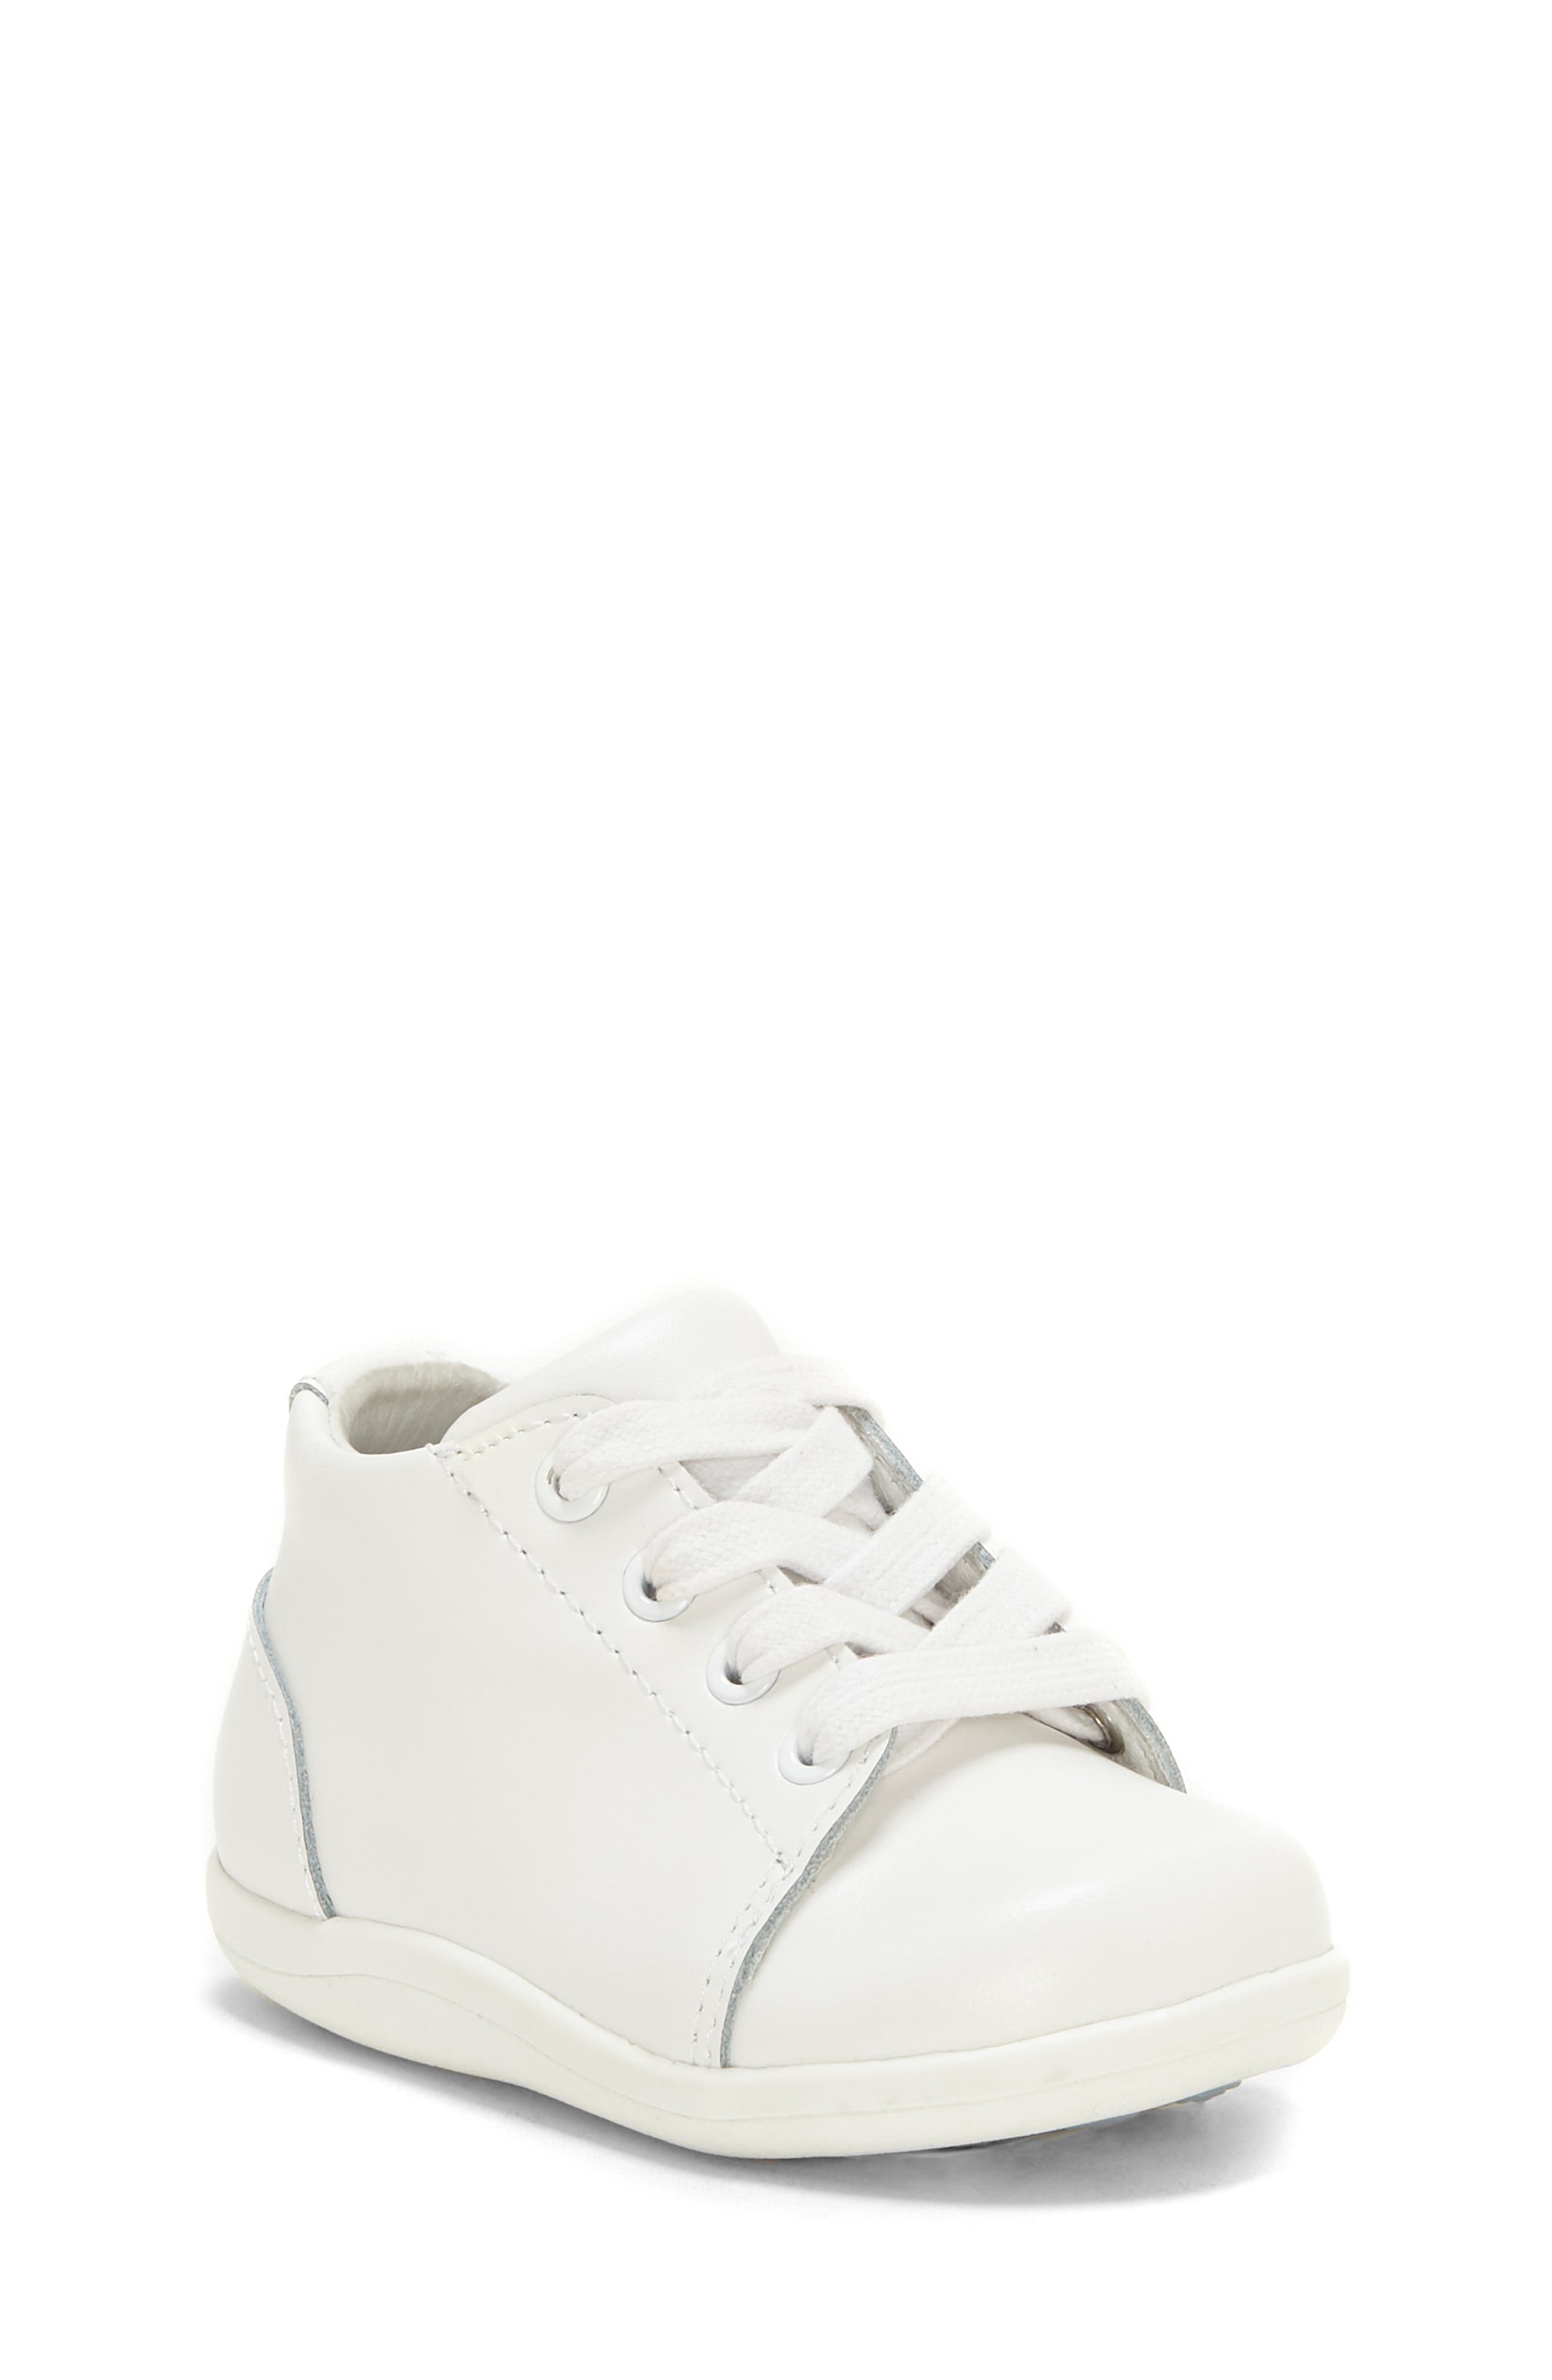 Boys Sole Play' Sneakers \u0026 Athletic Shoes